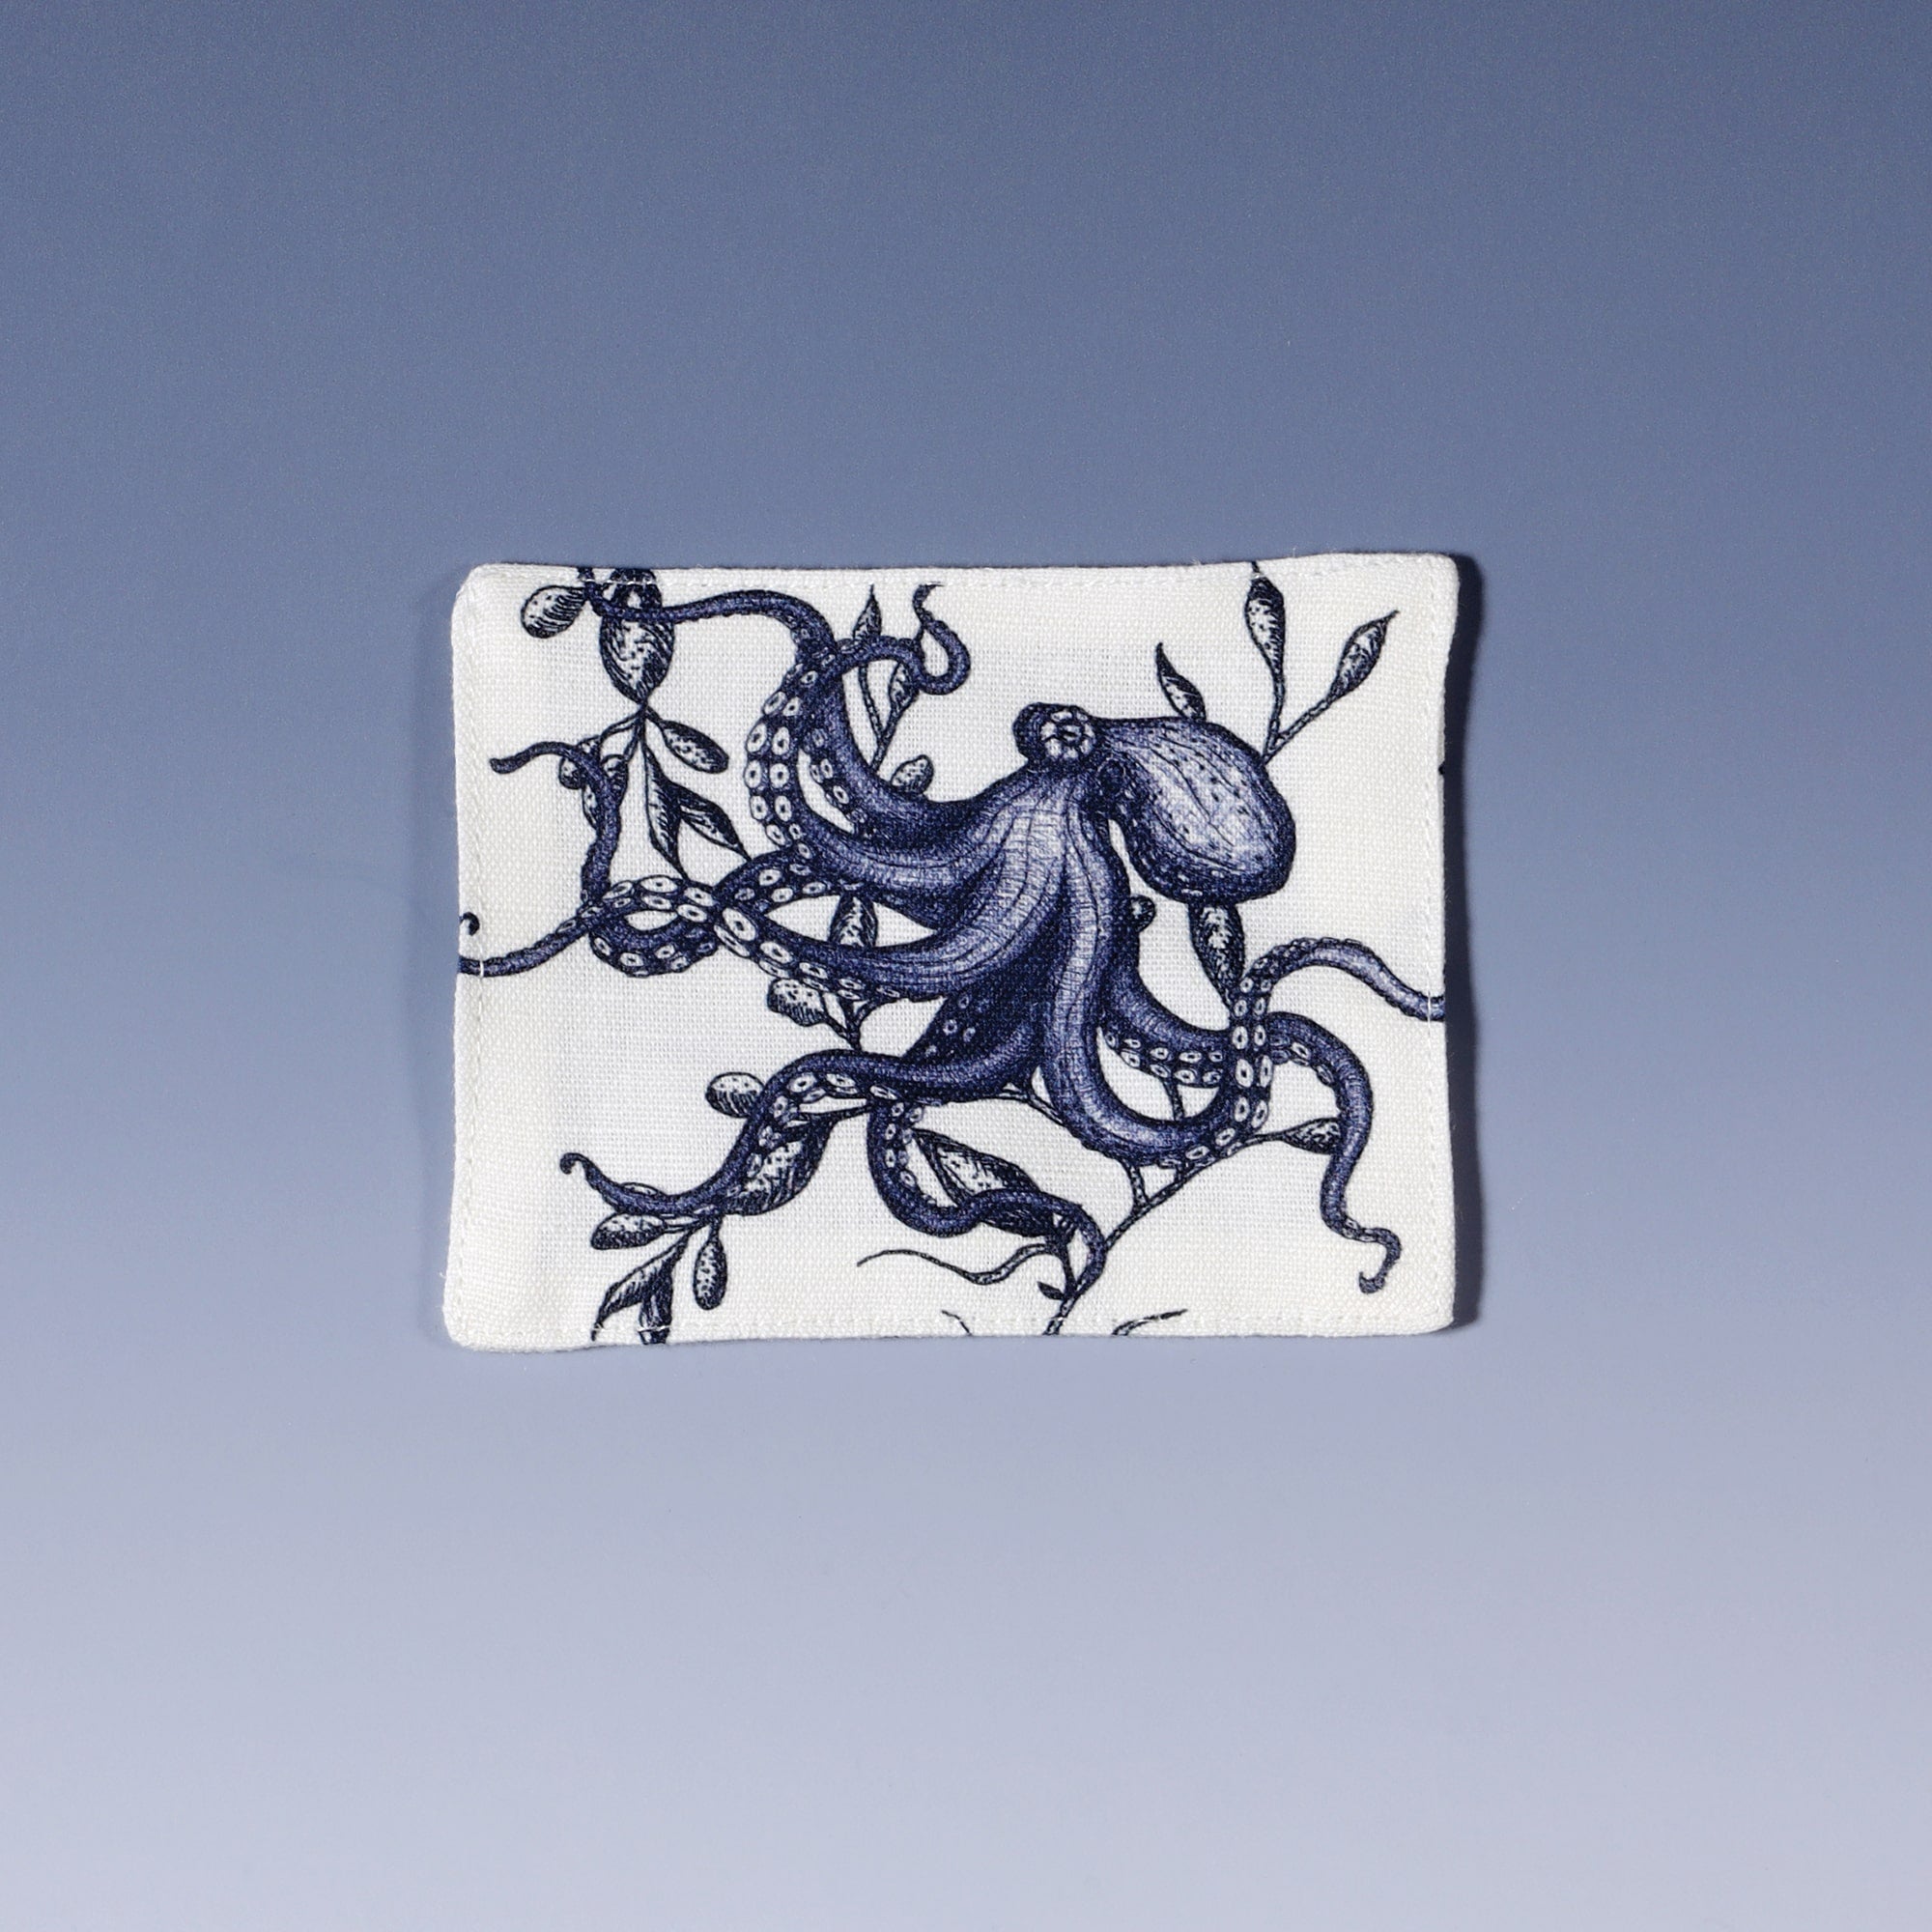 Cotton and linen mix white fabric rectangular coaster.Design on both sides is a hand drawn illustration of an octopus  in seaweed in navy blue.Set of four